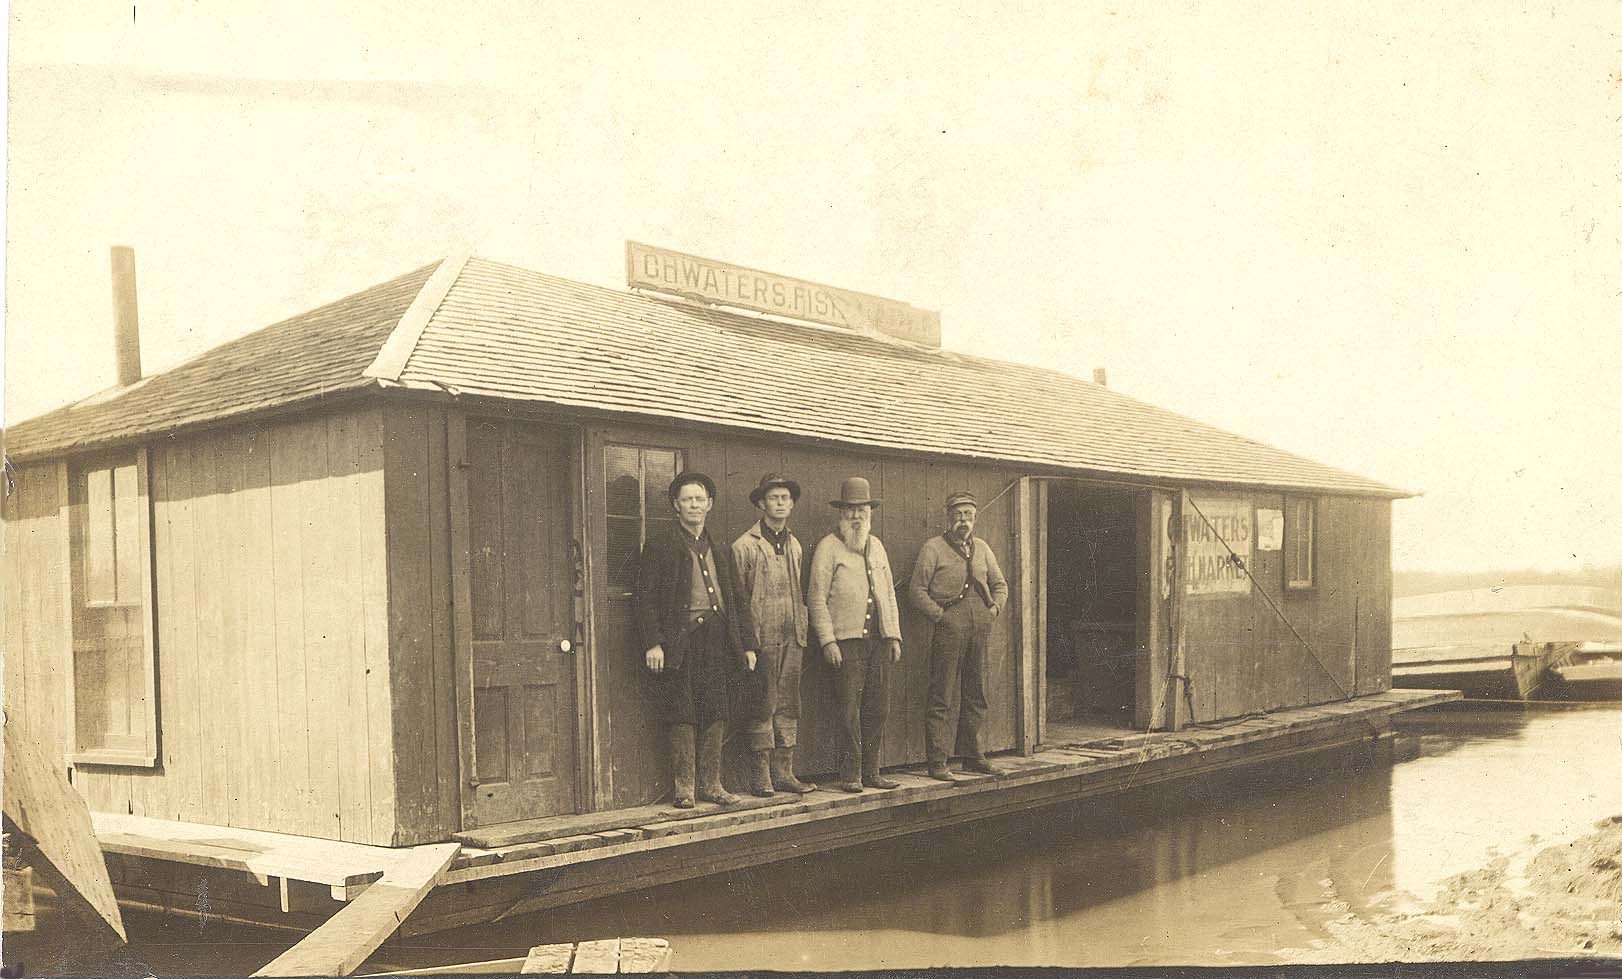 <b>Waters Fish Market</b>, circa early 1900s.  From left to right, C. H. Waters, Warren Waters, Alfred Zeigler, and John Harris.